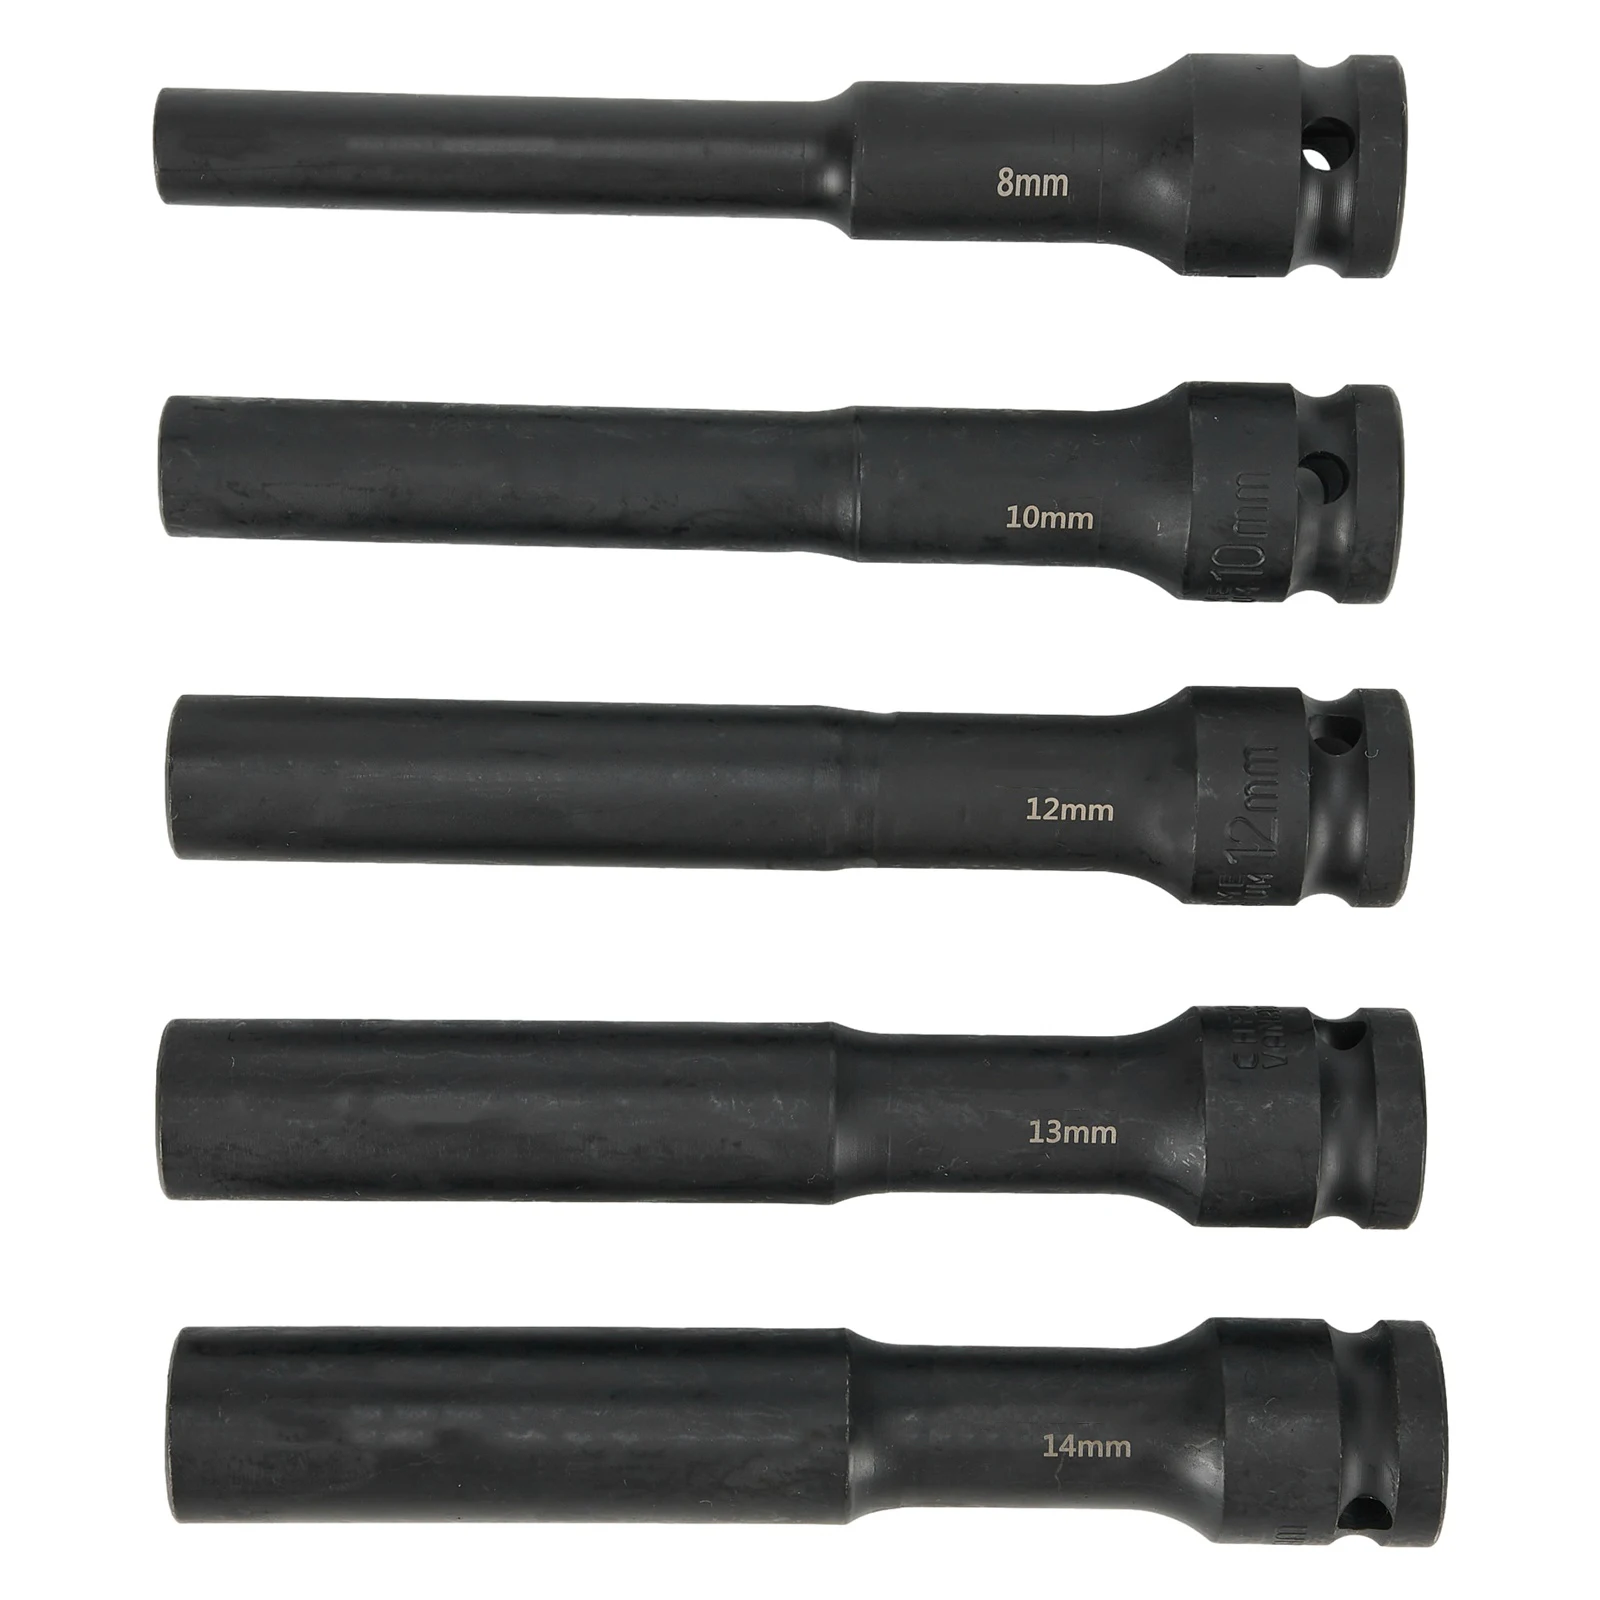 

Impact Wrench Hex Socket Head Adapter Spanner Converter Set of 5, Black, Construction, Multiple Sizes Available